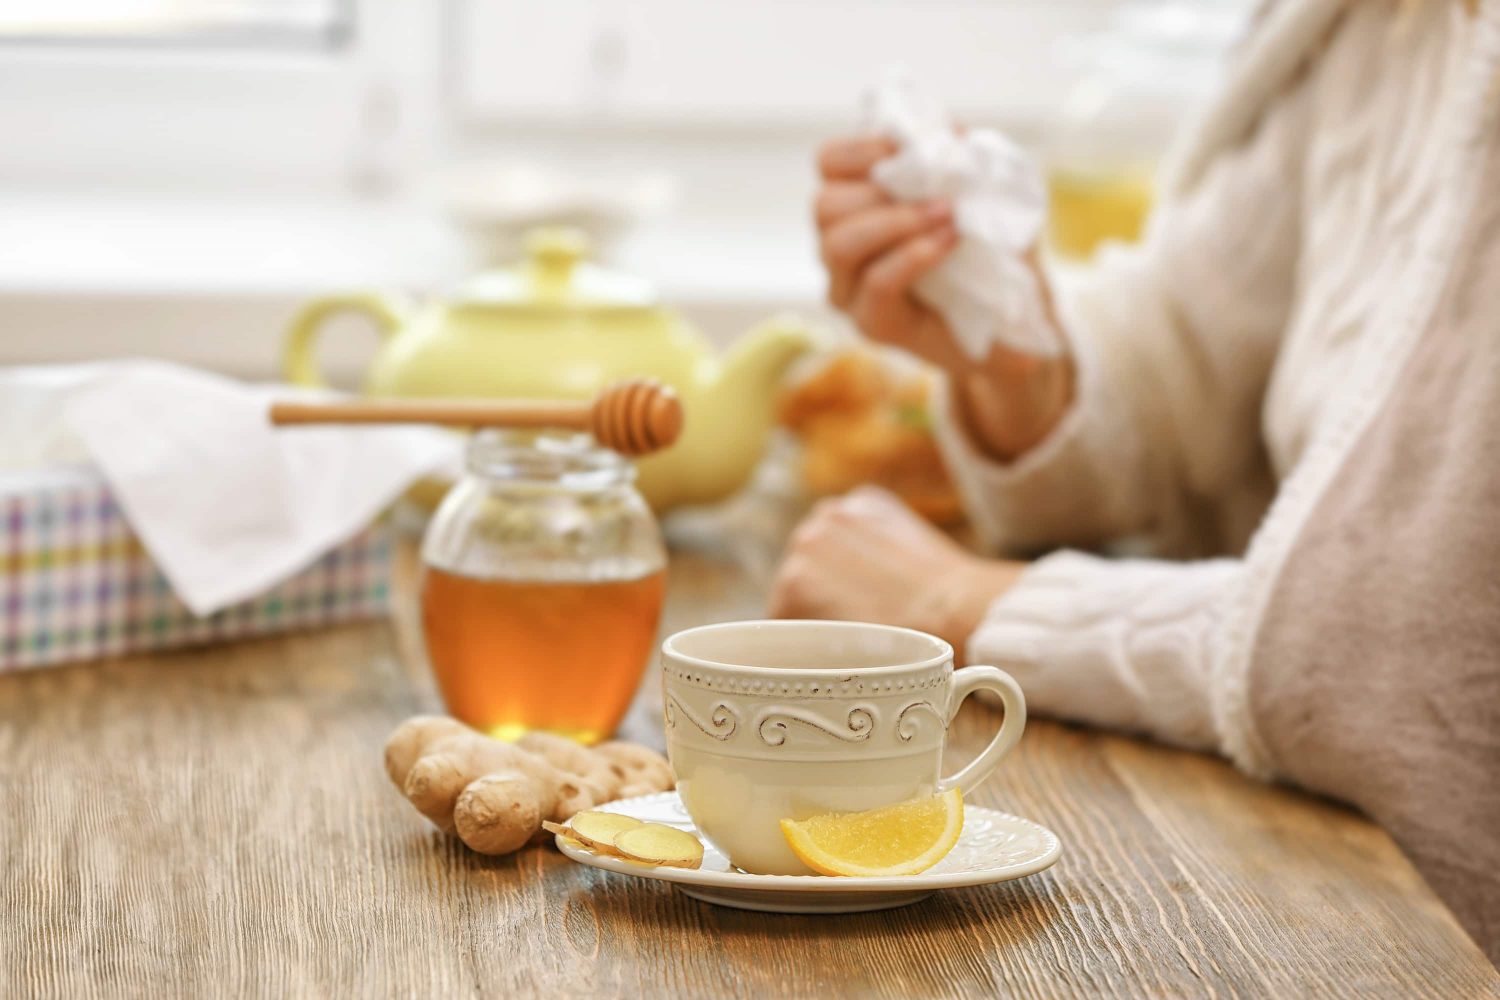 A valued cup of tea set on a table assorted with lemon, ginger and honey.